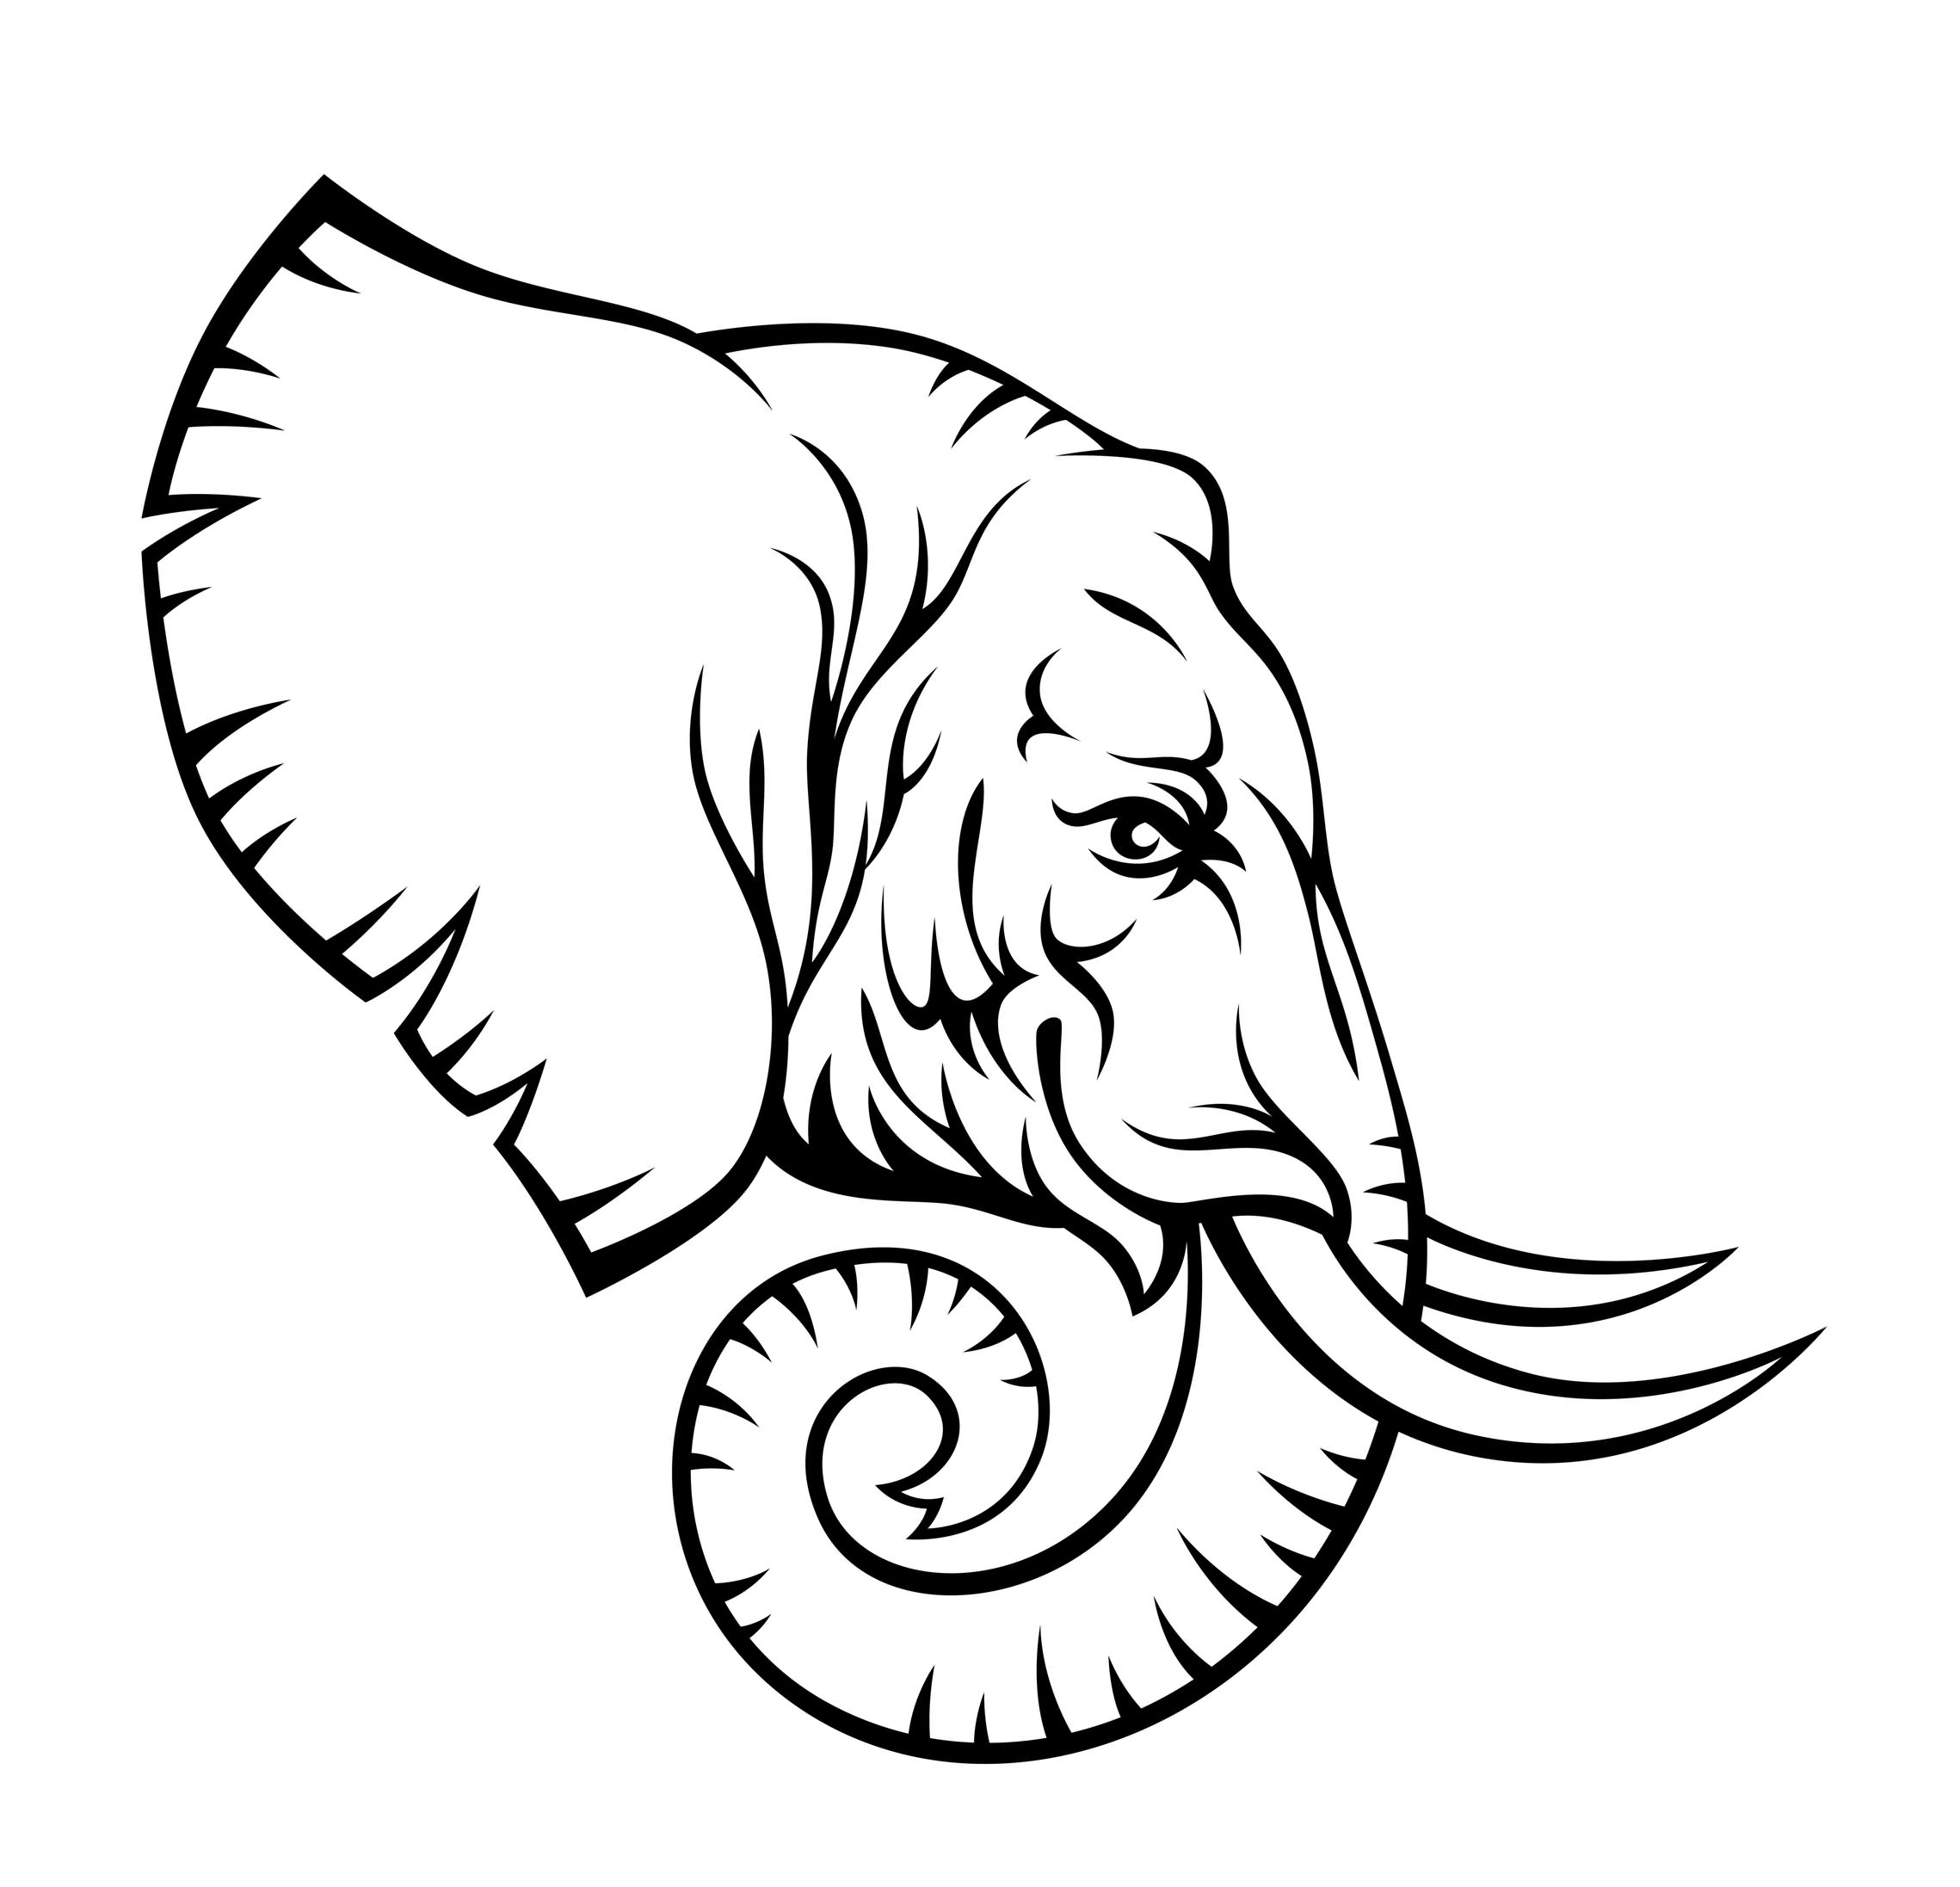 Elephant Head Outline | Free download on ClipArtMag